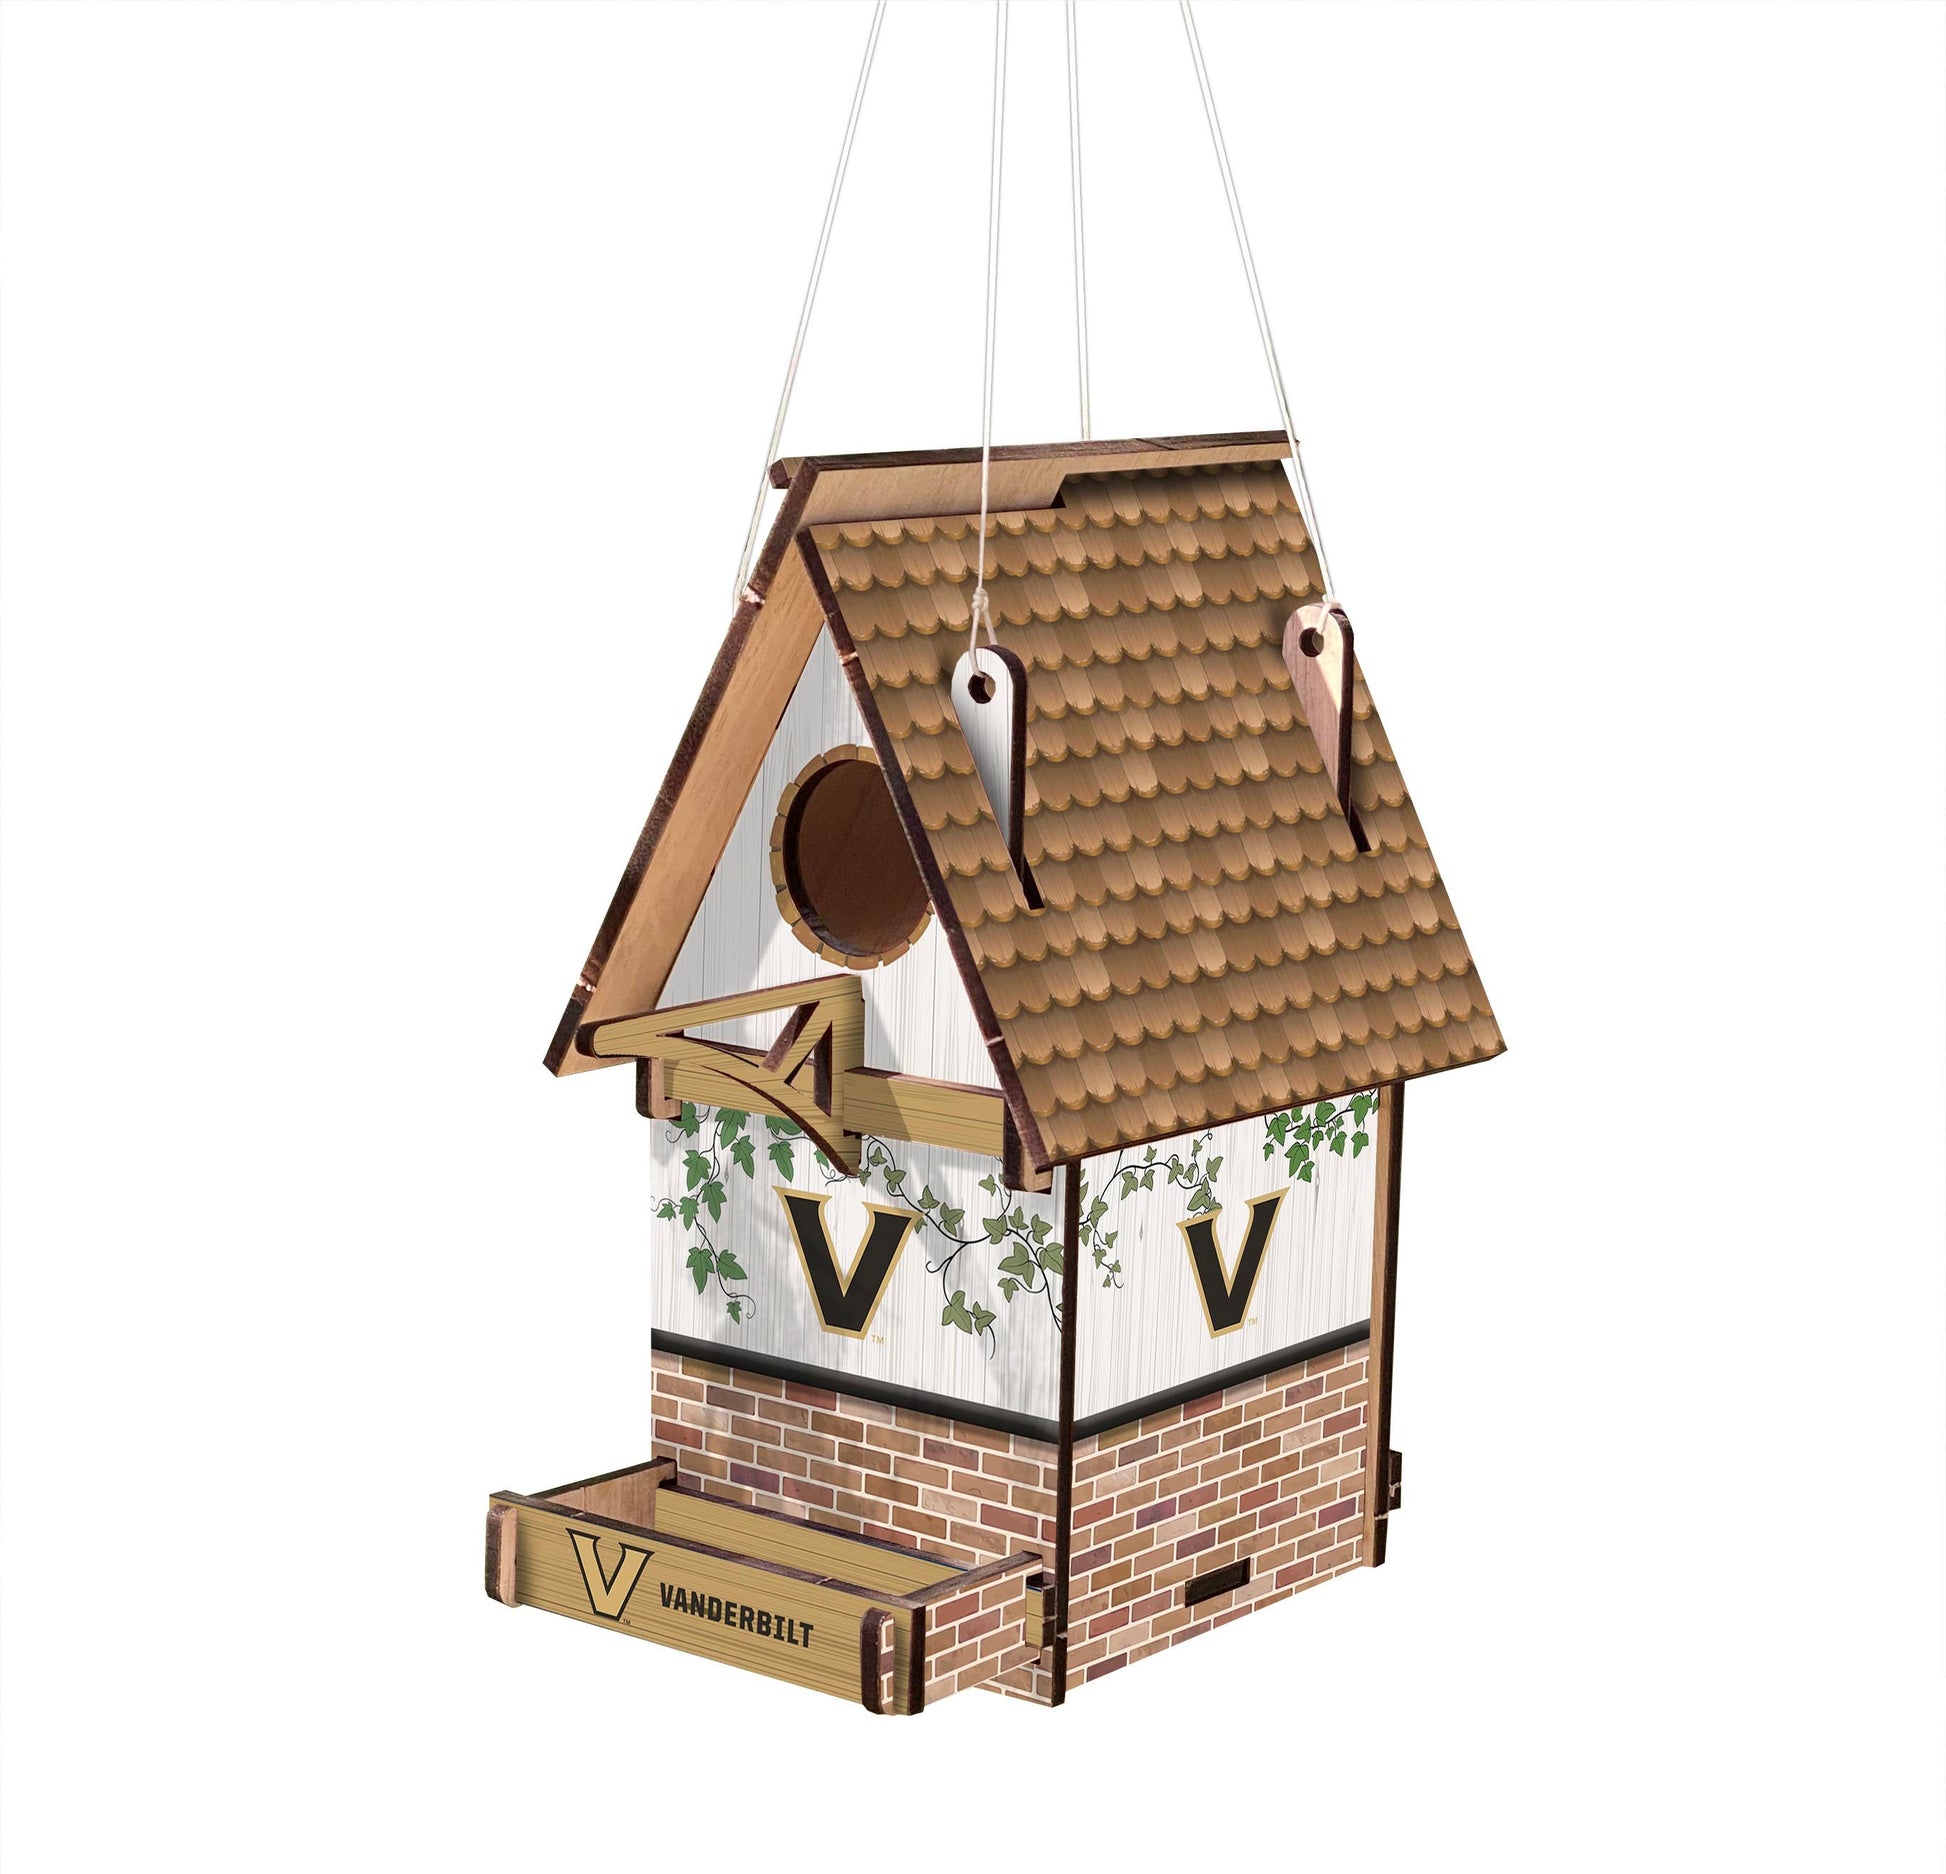 Show your love for the Commodores and birds with this officially licensed Vanderbilt Commodores wood birdhouse. Made in the USA, this birdhouse is fashioned from MDF and features team graphics and colors to show your team spirit. 